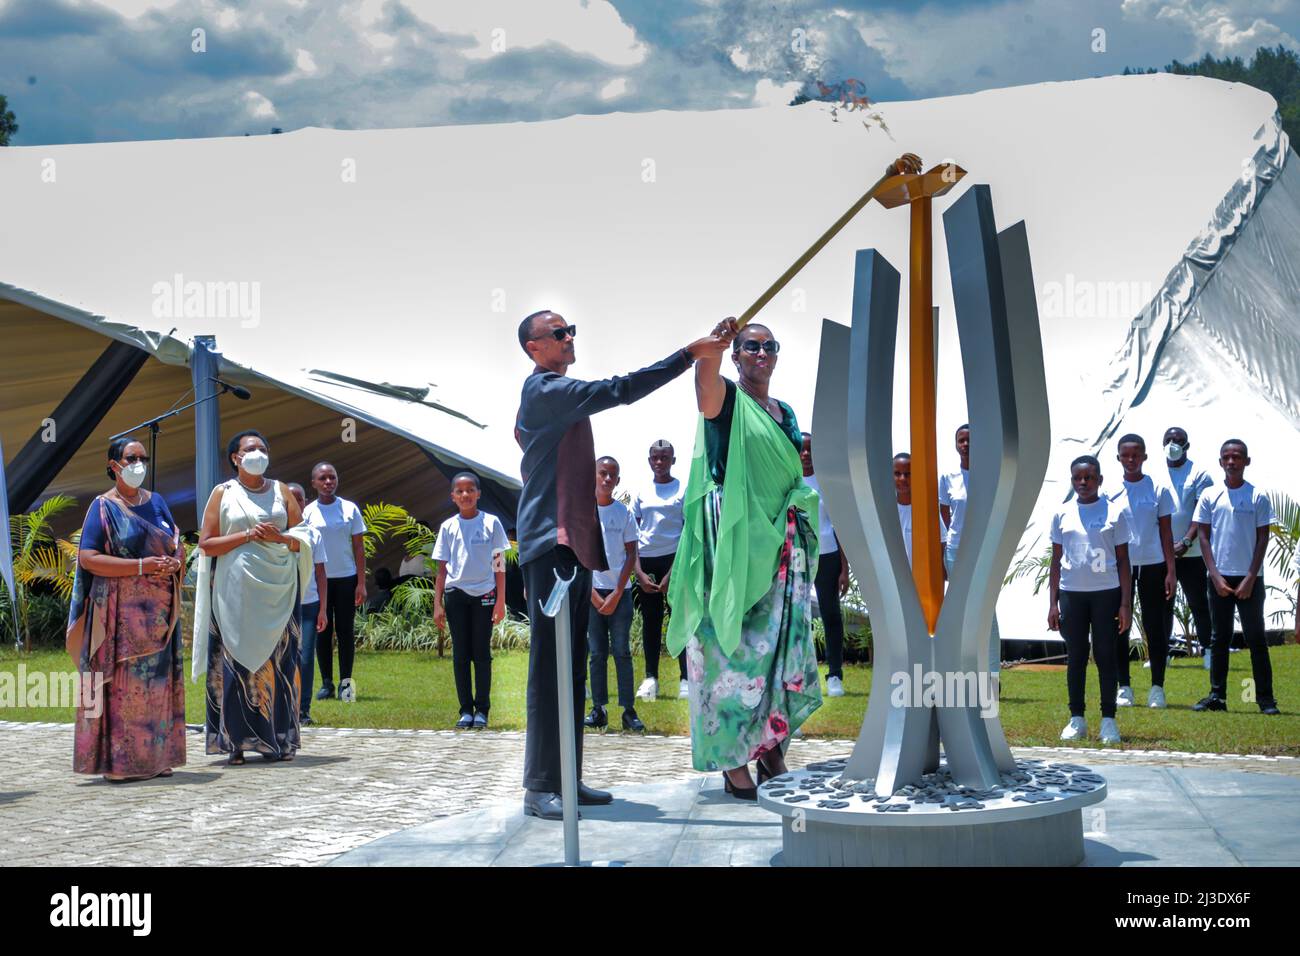 Kigali, Rwanda. 7th Apr, 2022. Rwandan President Paul Kagame (C) and first lady Jeannette Kagame light a flame of remembrance at the Kigali Genocide Memorial in Kigali, capital city of Rwanda, on April 7, 2022. Rwandan President Paul Kagame on Thursday slammed countries covering up acts of the perpetrators of the 1994 genocide against the Tutsi, as Rwandans marked the 28th anniversary of the massacres. Credit: Cyril Ndegeya/Xinhua/Alamy Live News Stock Photo